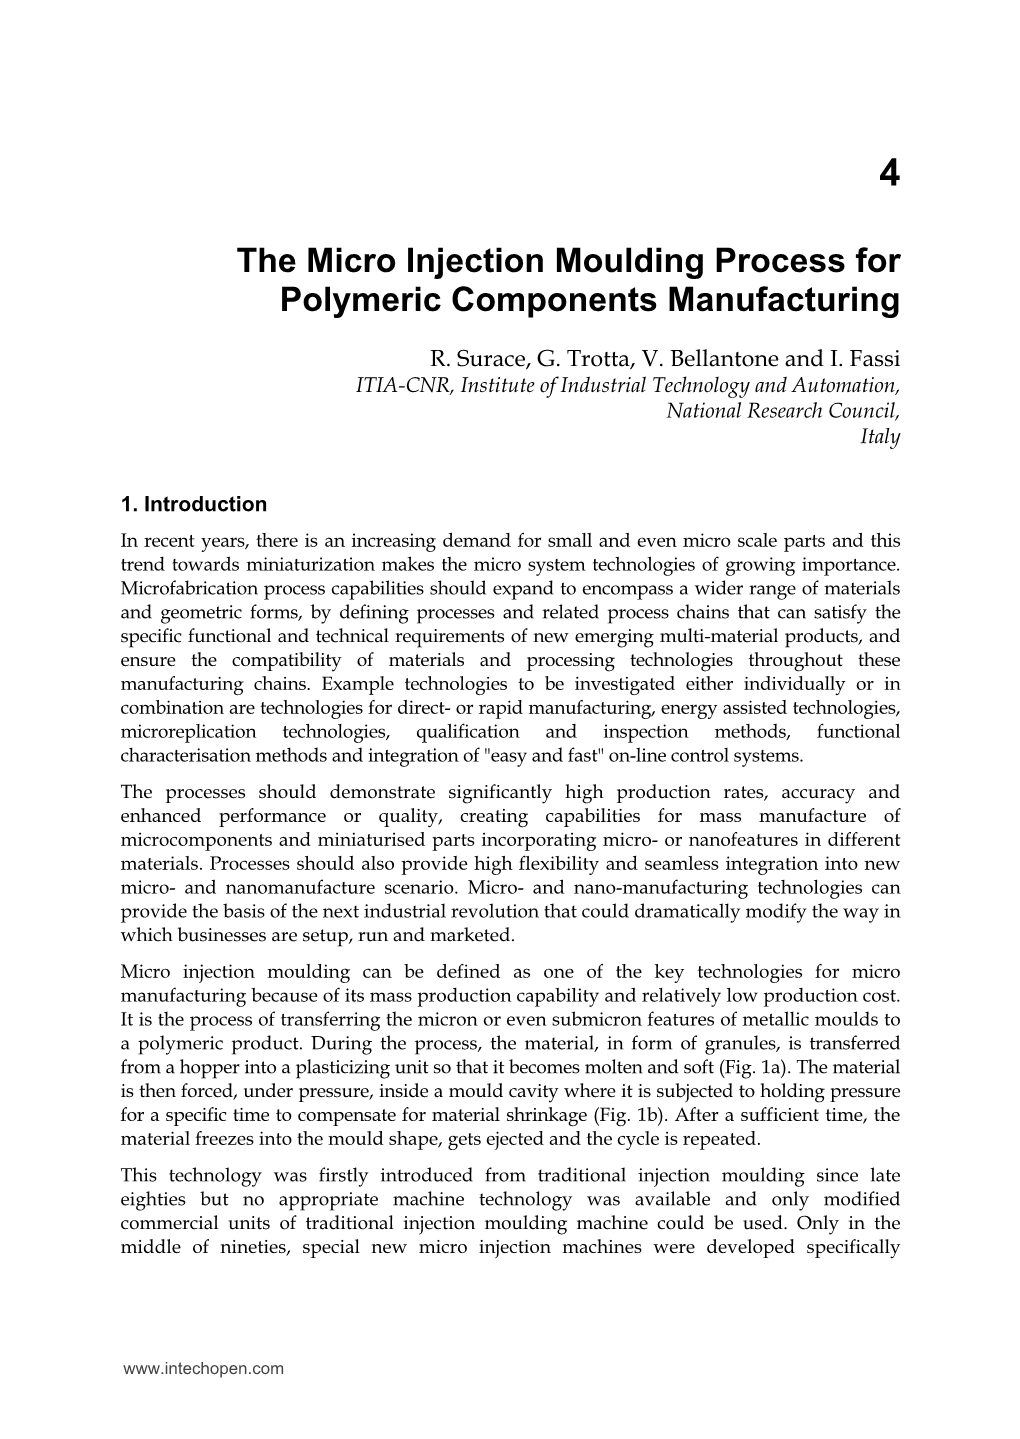 The Micro Injection Moulding Process for Polymeric Components Manufacturing